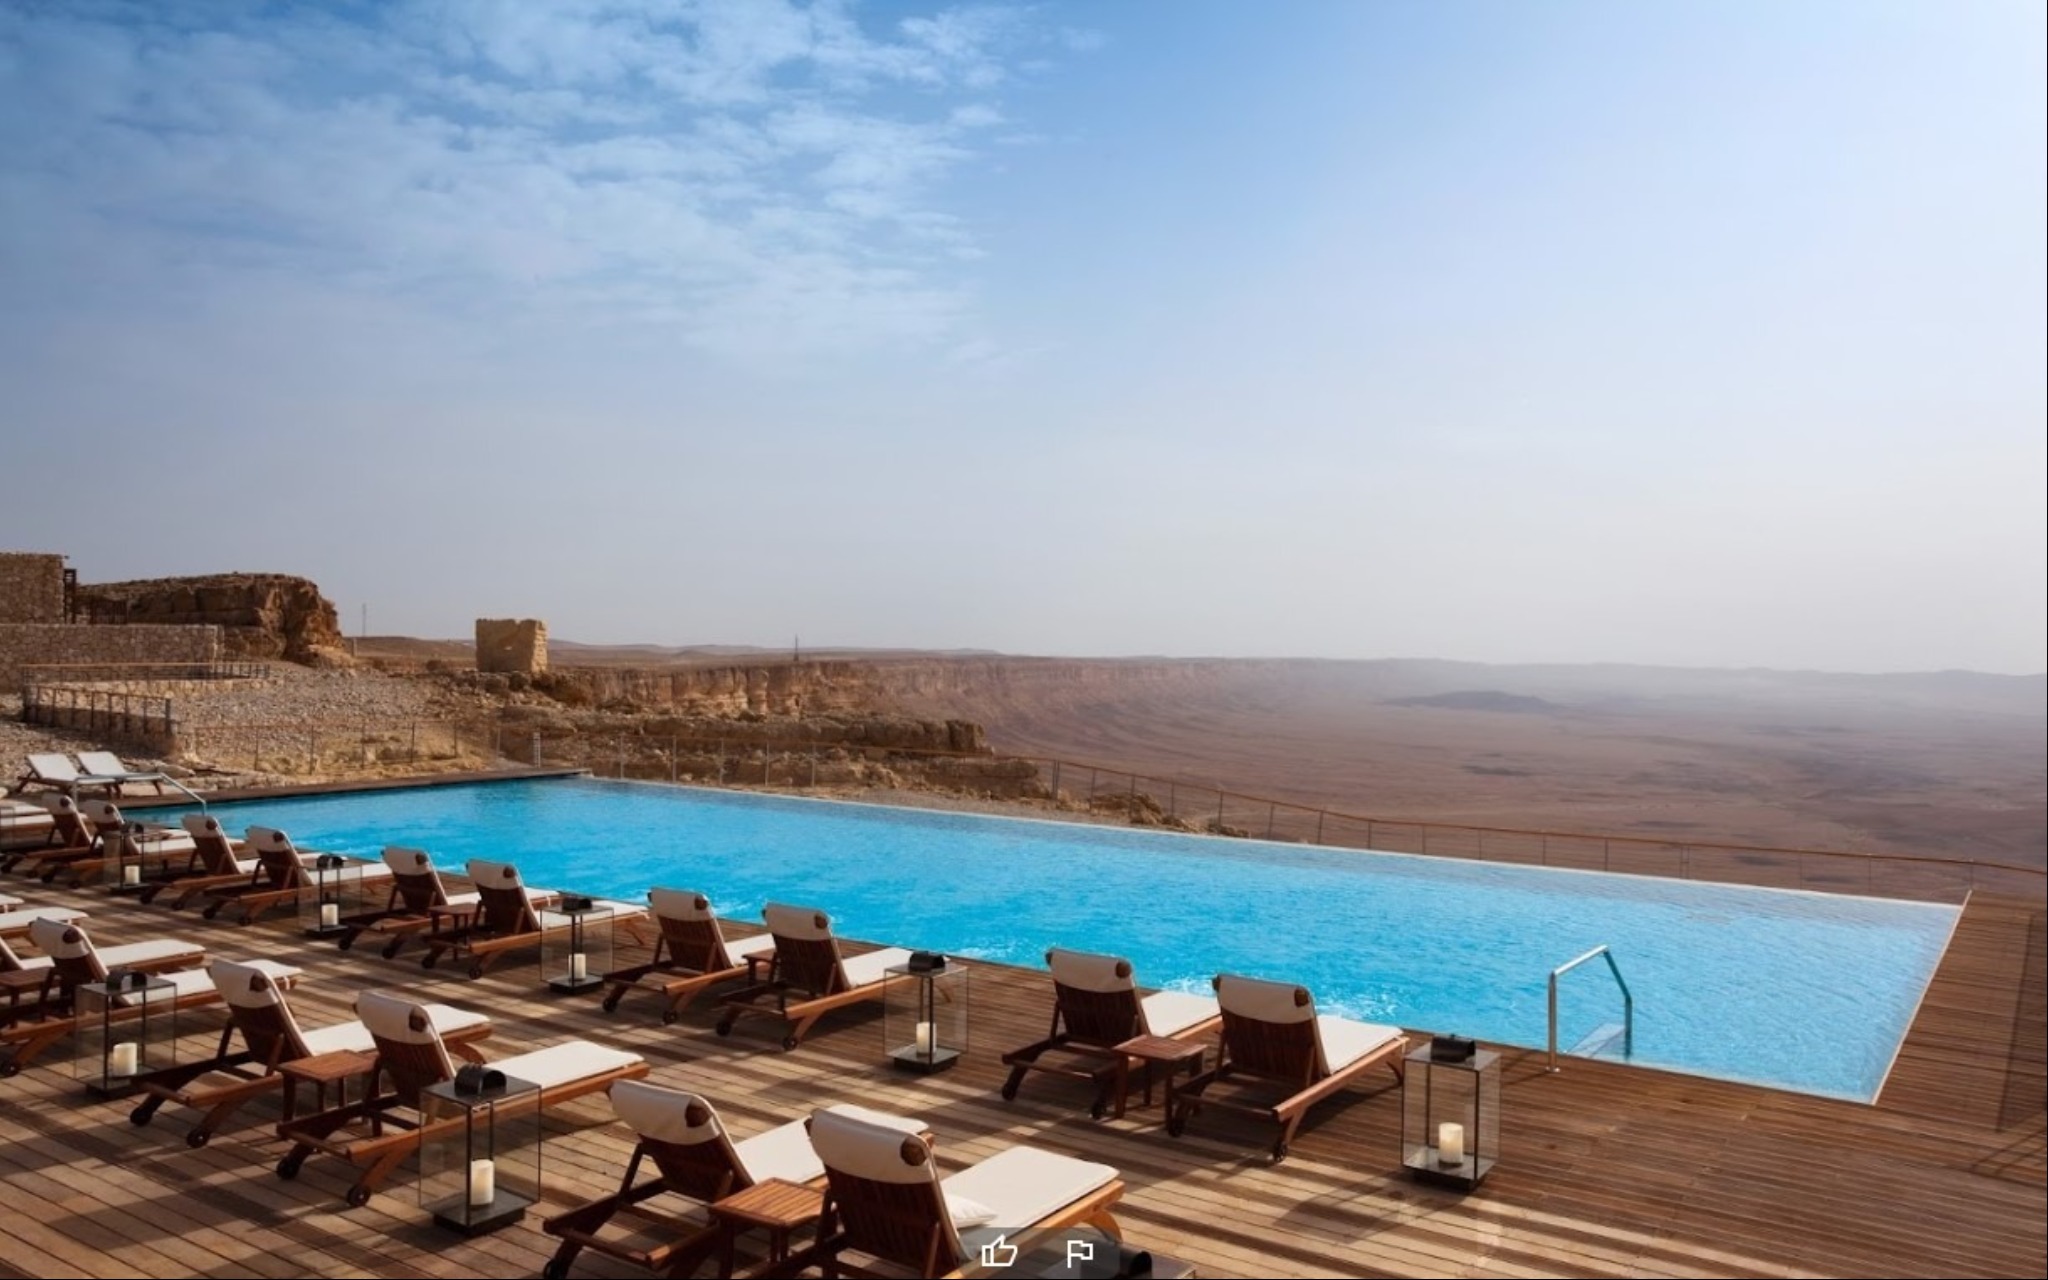 The Beresheet Hotel takes luxury to a new level, featuring one of the most breathtaking swimming pools in the world (Source: Beresheet hotel)